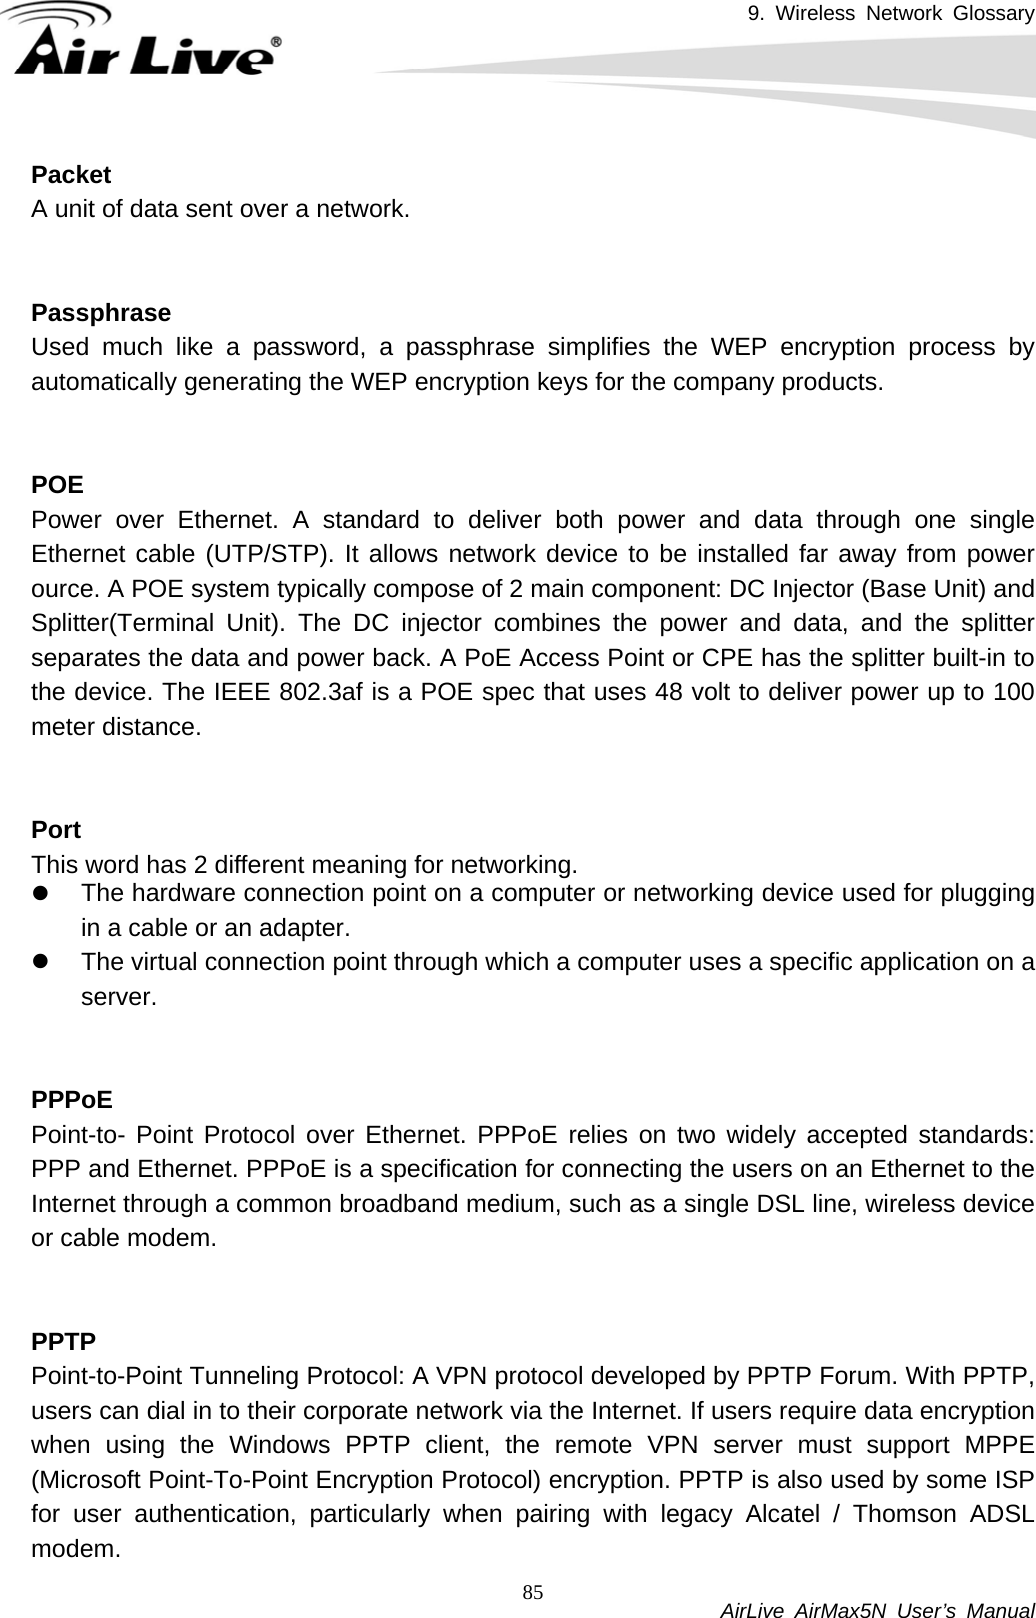 9. Wireless Network Glossary           AirLive AirMax5N User’s Manual 85PacketA unit of data sent over a network.   PassphraseUsed much like a password, a passphrase simplifies the WEP encryption process by automatically generating the WEP encryption keys for the company products.   POEPower over Ethernet. A standard to deliver both power and data through one single Ethernet cable (UTP/STP). It allows network device to be installed far away from power ource. A POE system typically compose of 2 main component: DC Injector (Base Unit) and Splitter(Terminal Unit). The DC injector combines the power and data, and the splitter separates the data and power back. A PoE Access Point or CPE has the splitter built-in to the device. The IEEE 802.3af is a POE spec that uses 48 volt to deliver power up to 100 meter distance.   PortThis word has 2 different meaning for networking. z The hardware connection point on a computer or networking device used for plugging in a cable or an adapter. z The virtual connection point through which a computer uses a specific application on a server.   PPPoEPoint-to- Point Protocol over Ethernet. PPPoE relies on two widely accepted standards: PPP and Ethernet. PPPoE is a specification for connecting the users on an Ethernet to the Internet through a common broadband medium, such as a single DSL line, wireless device or cable modem.     PPTPPoint-to-Point Tunneling Protocol: A VPN protocol developed by PPTP Forum. With PPTP, users can dial in to their corporate network via the Internet. If users require data encryption when using the Windows PPTP client, the remote VPN server must support MPPE (Microsoft Point-To-Point Encryption Protocol) encryption. PPTP is also used by some ISP for user authentication, particularly when pairing with legacy Alcatel / Thomson ADSL modem. 